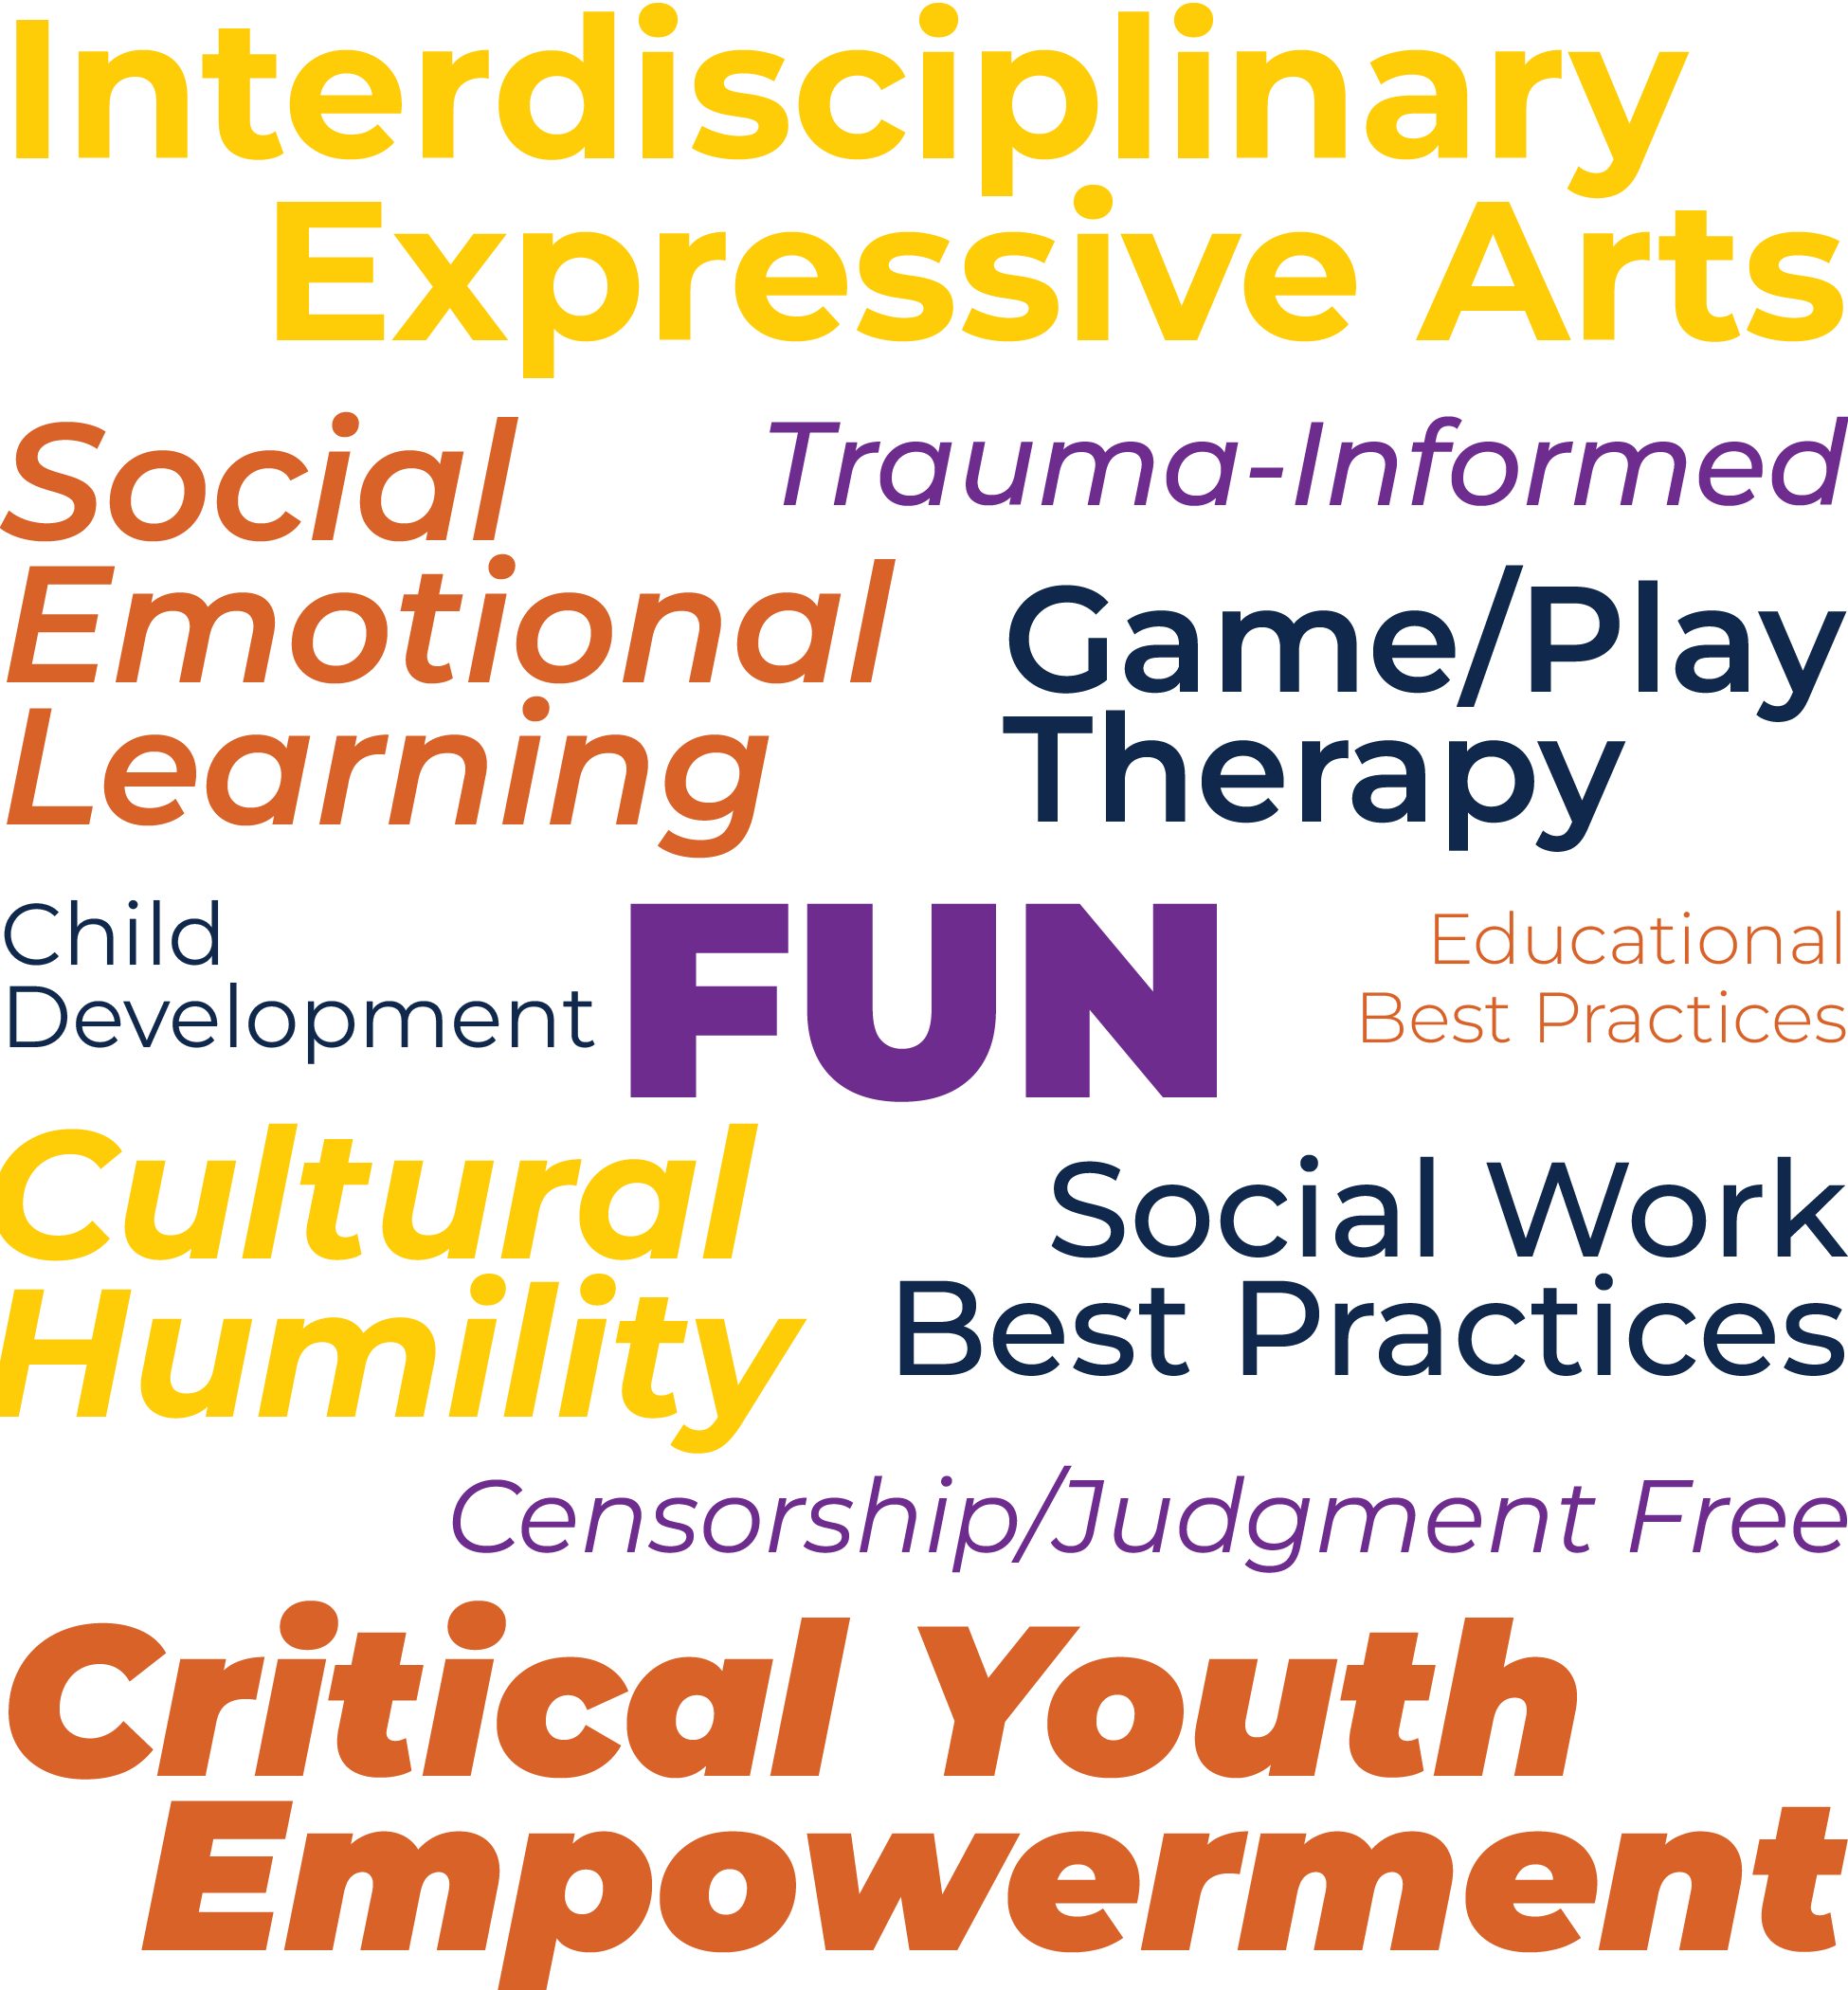 Critical youth empowerment, Social work best practices, Educational best practices, Game/Play therapy, Cultural Humility, Interdisciplinary expressive arts, Fun, Trauma-informed, Child development, Social emotional learning, Censorship/judgment free